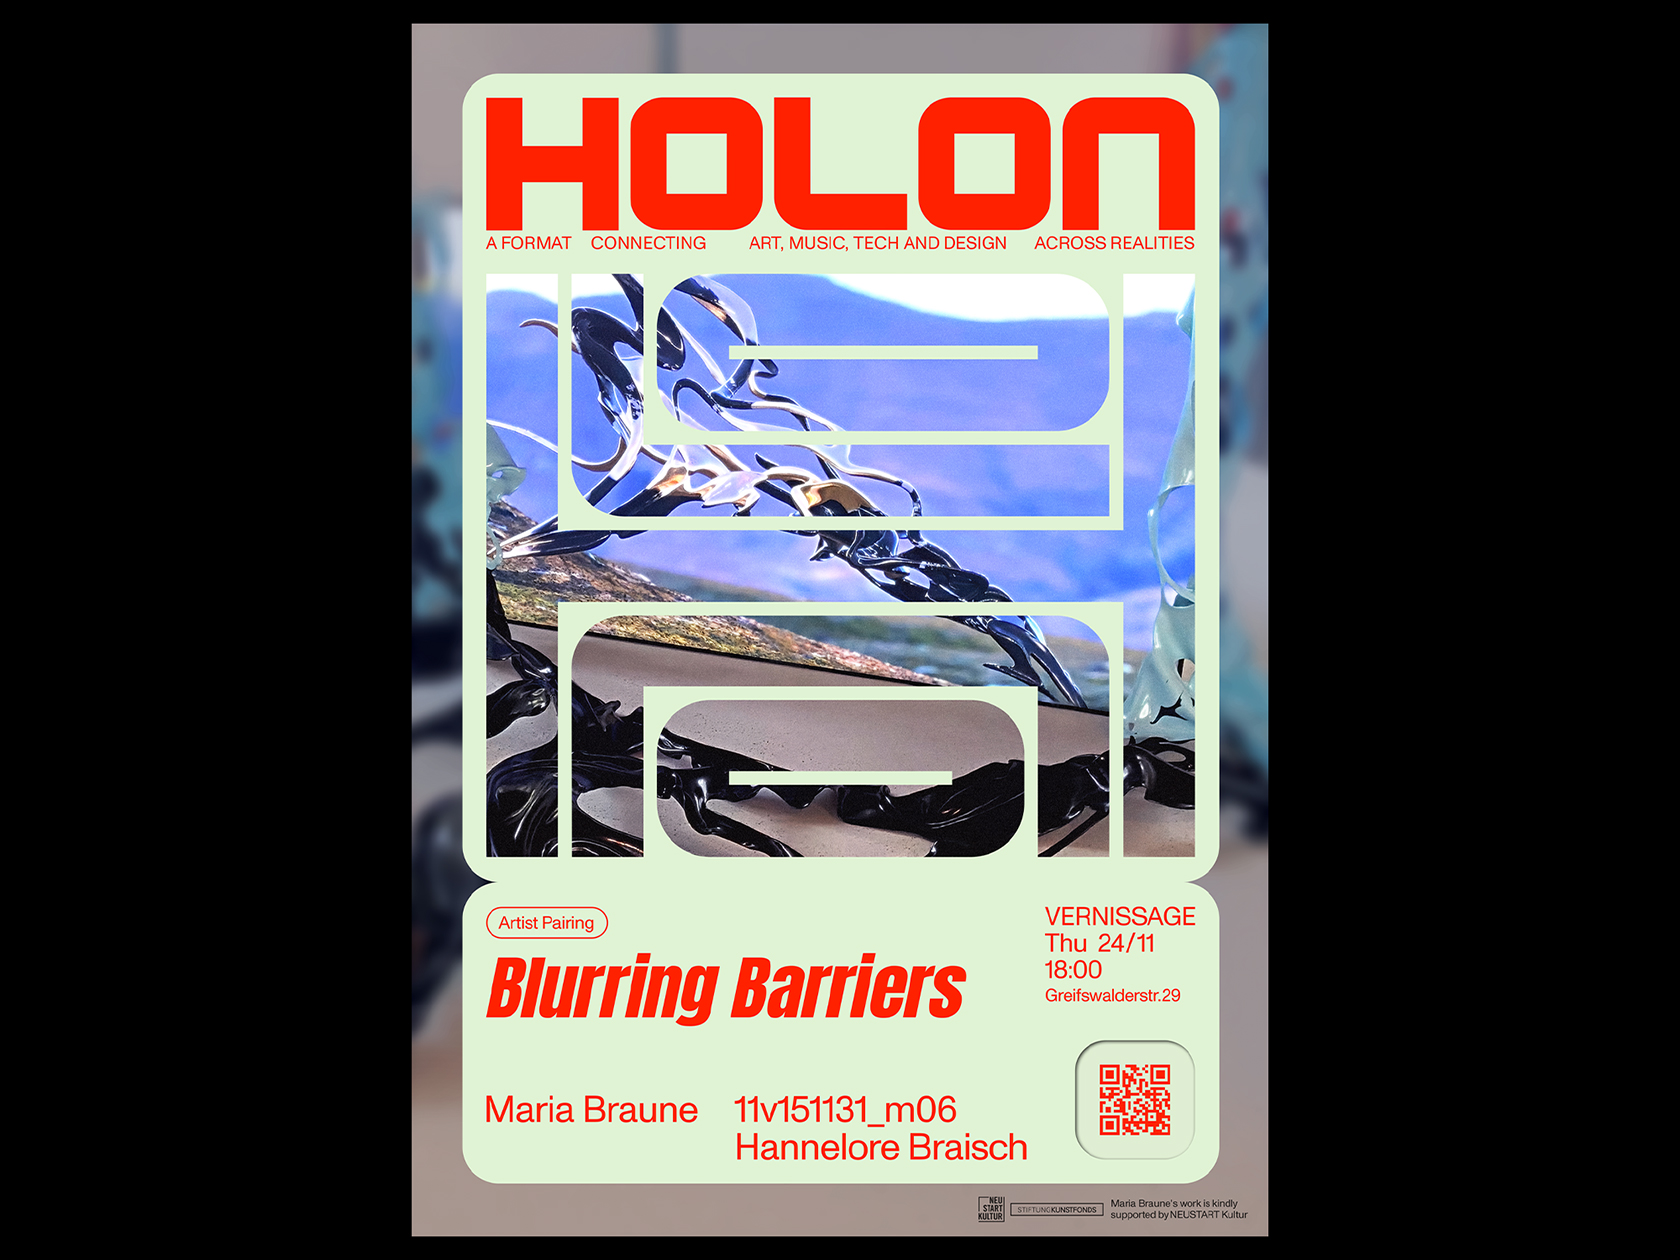 Initiated by MONOMANGO, HOLON invites you to experience a new format for art, music, tech, and design